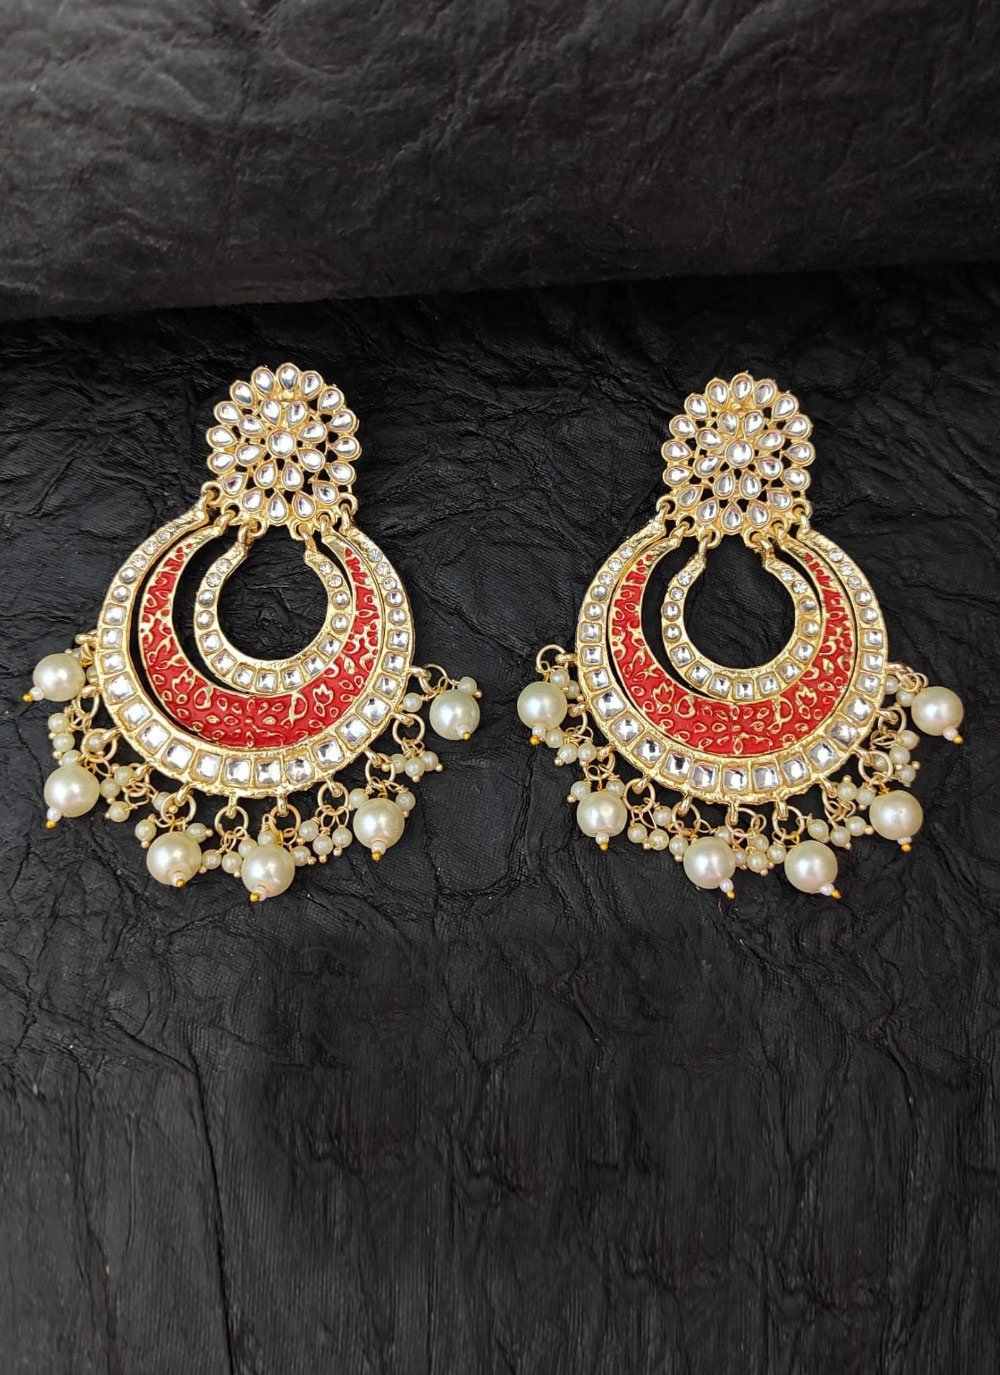 Charismatic Alloy Red and White Earrings